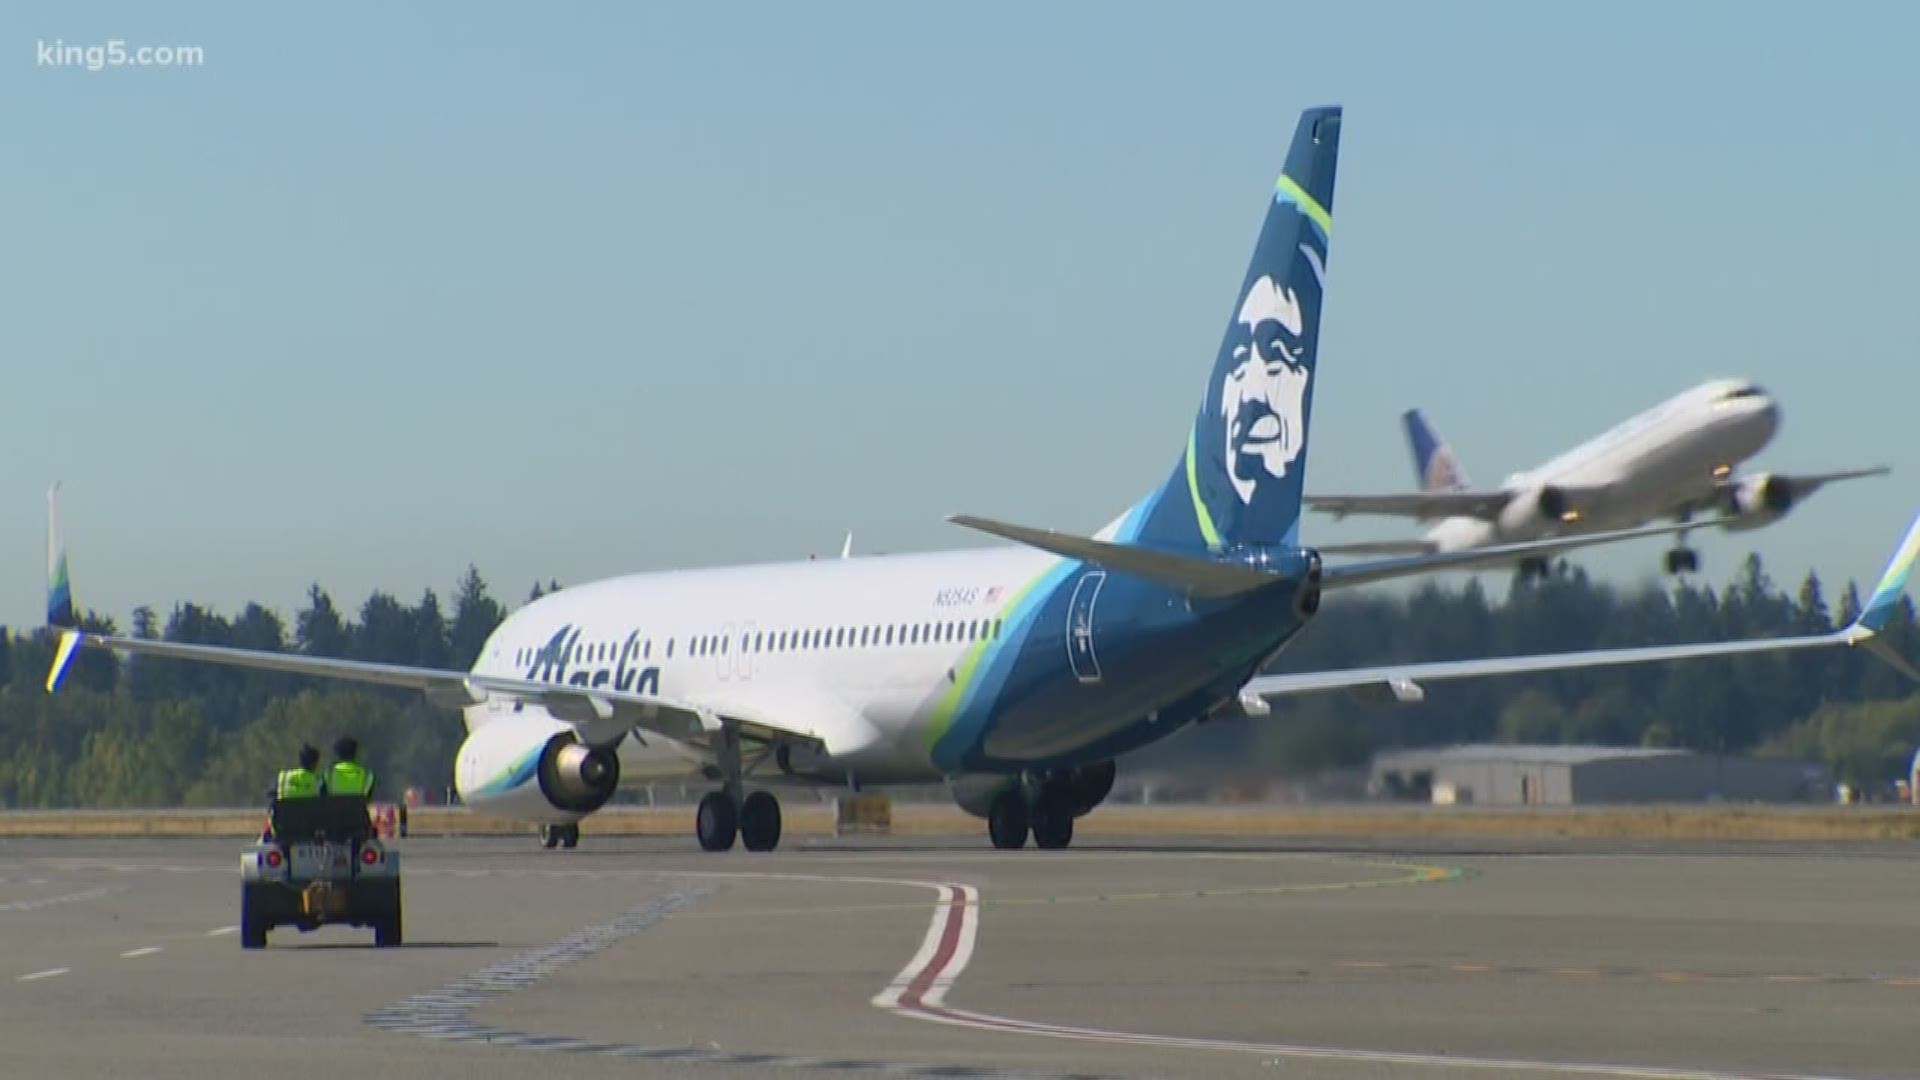 A Boeing 737 takes off somewhere every 15 seconds. As the world's most popular airliner, nearly 3 out of every 4 airplanes Boeing delivers, is a 737 in Renton. As part of Boeing's business, analysts estimate it accounts for half of Boeing's airline revenues, about 30 billion dollars a year. KING 5's Glenn Farley reports.